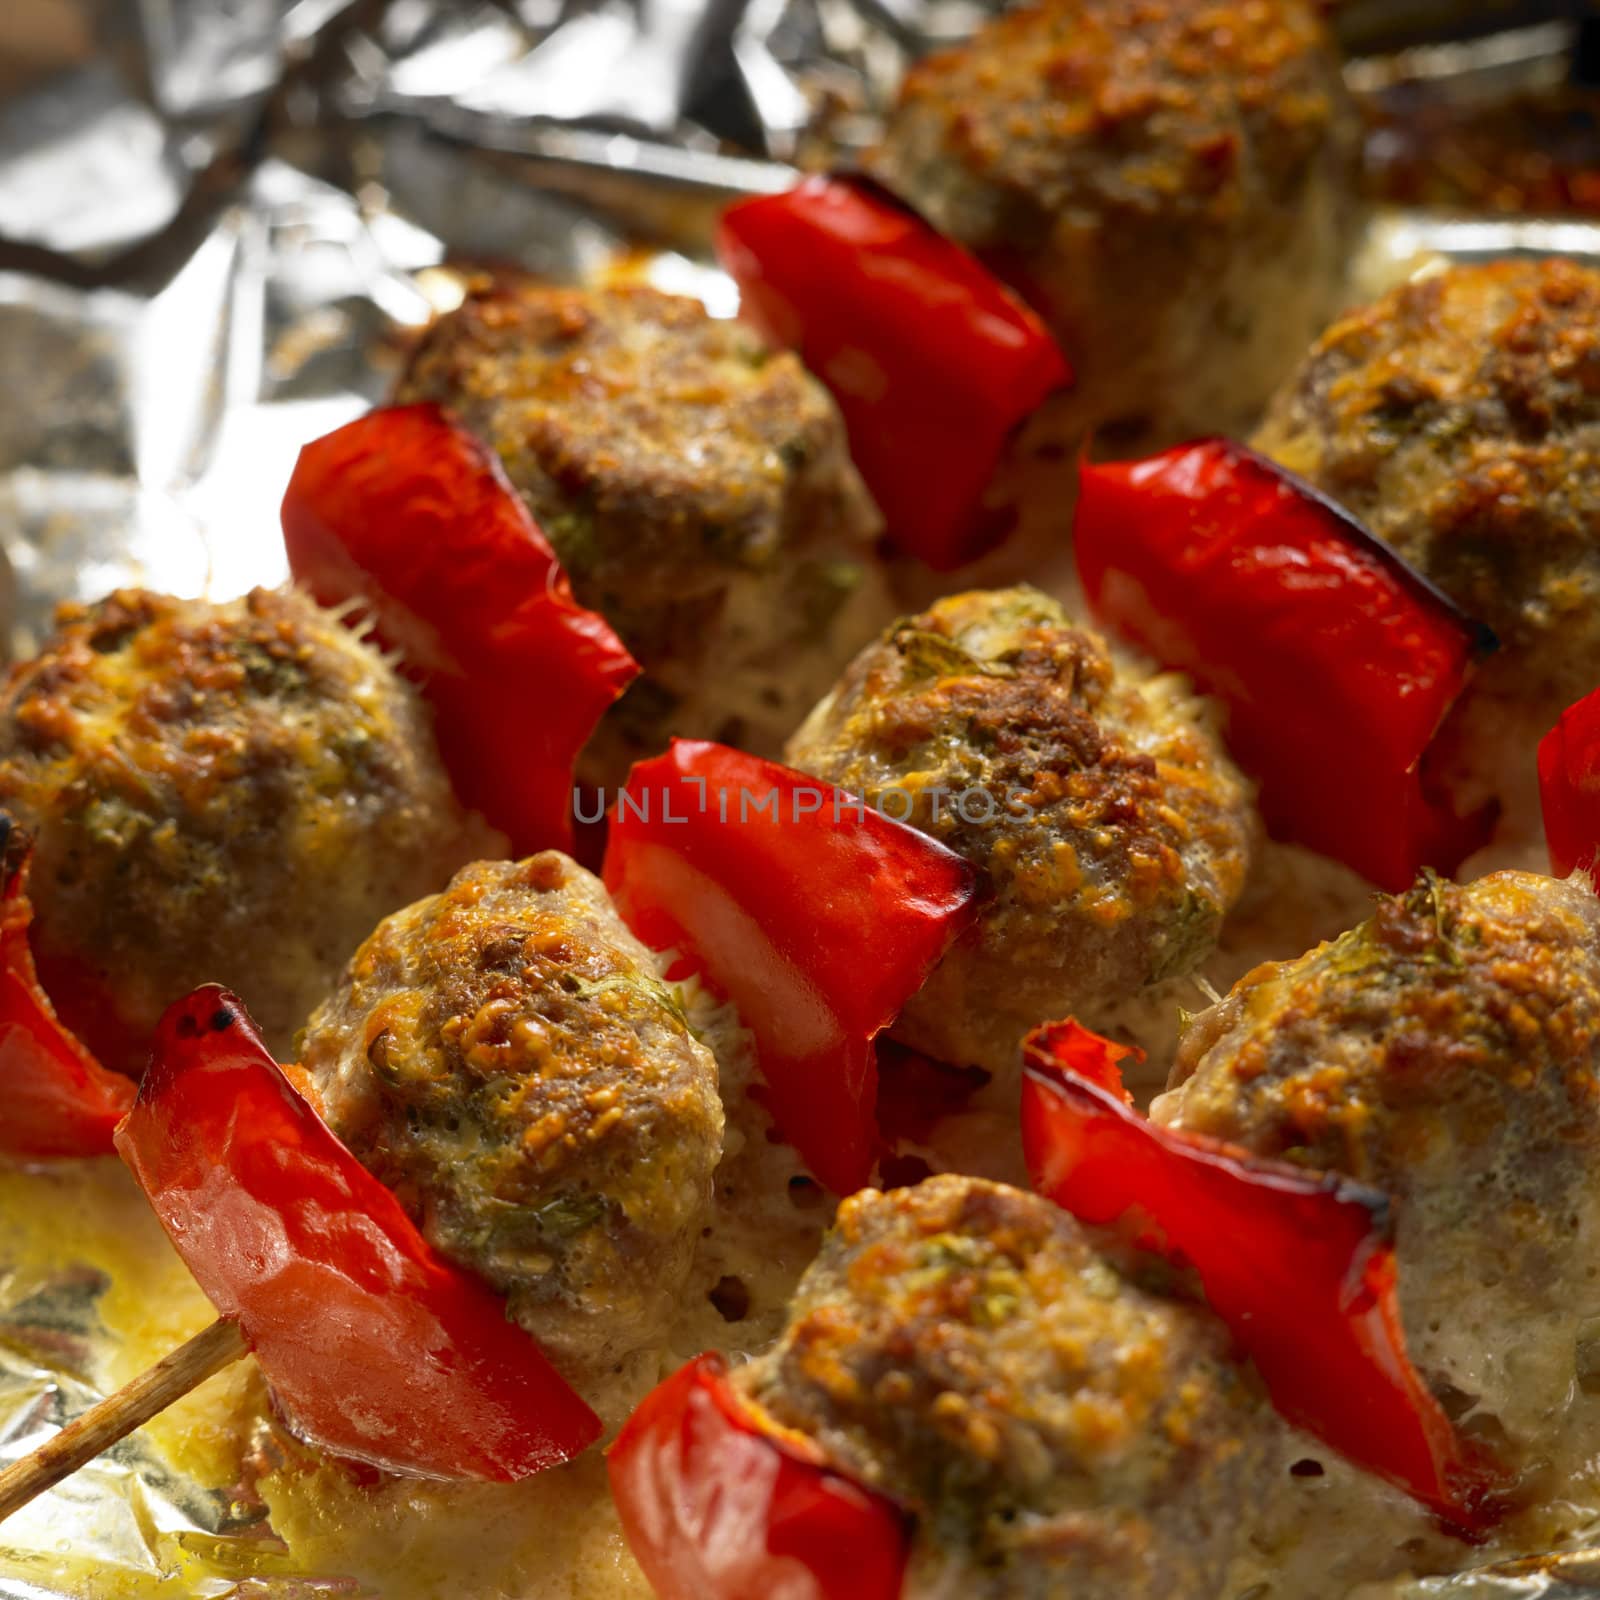 minced meat skewers by phbcz